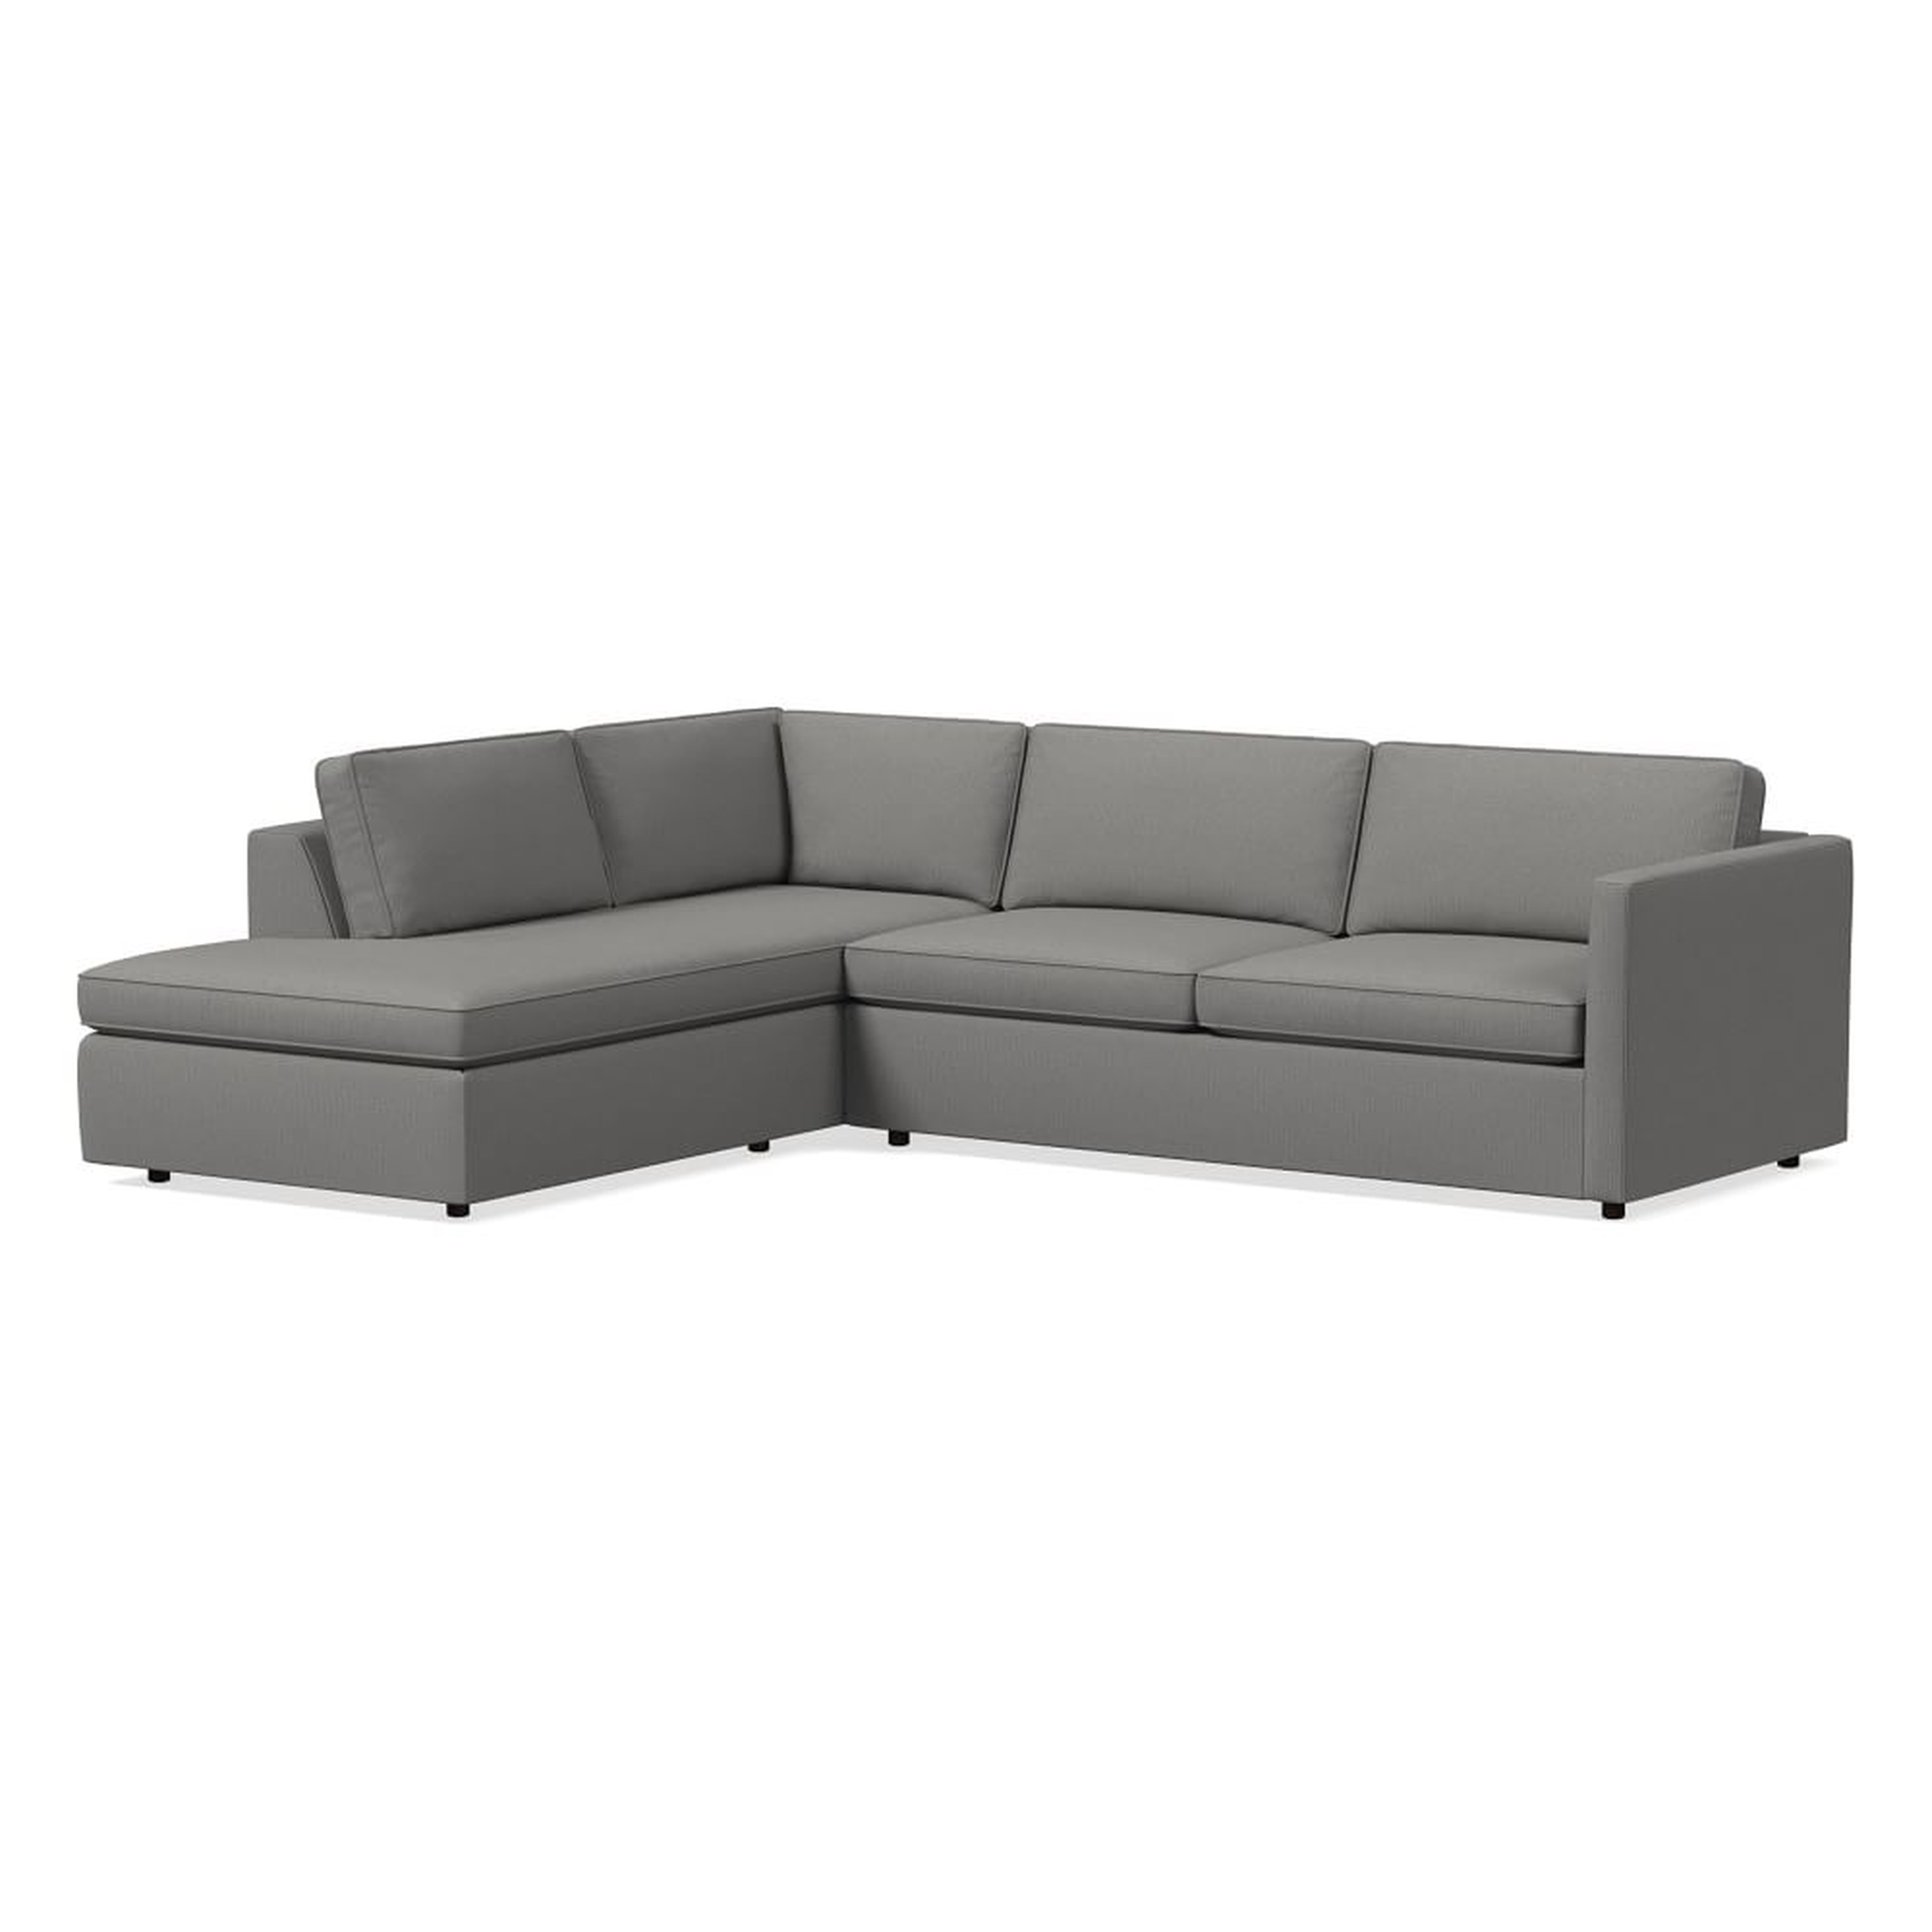 Harris Sectional Set 02: RA Sleeper Sofa, LA Terminal Chaise, Poly , Performance Washed Canvas, Storm Gray, Concealed Supports - West Elm